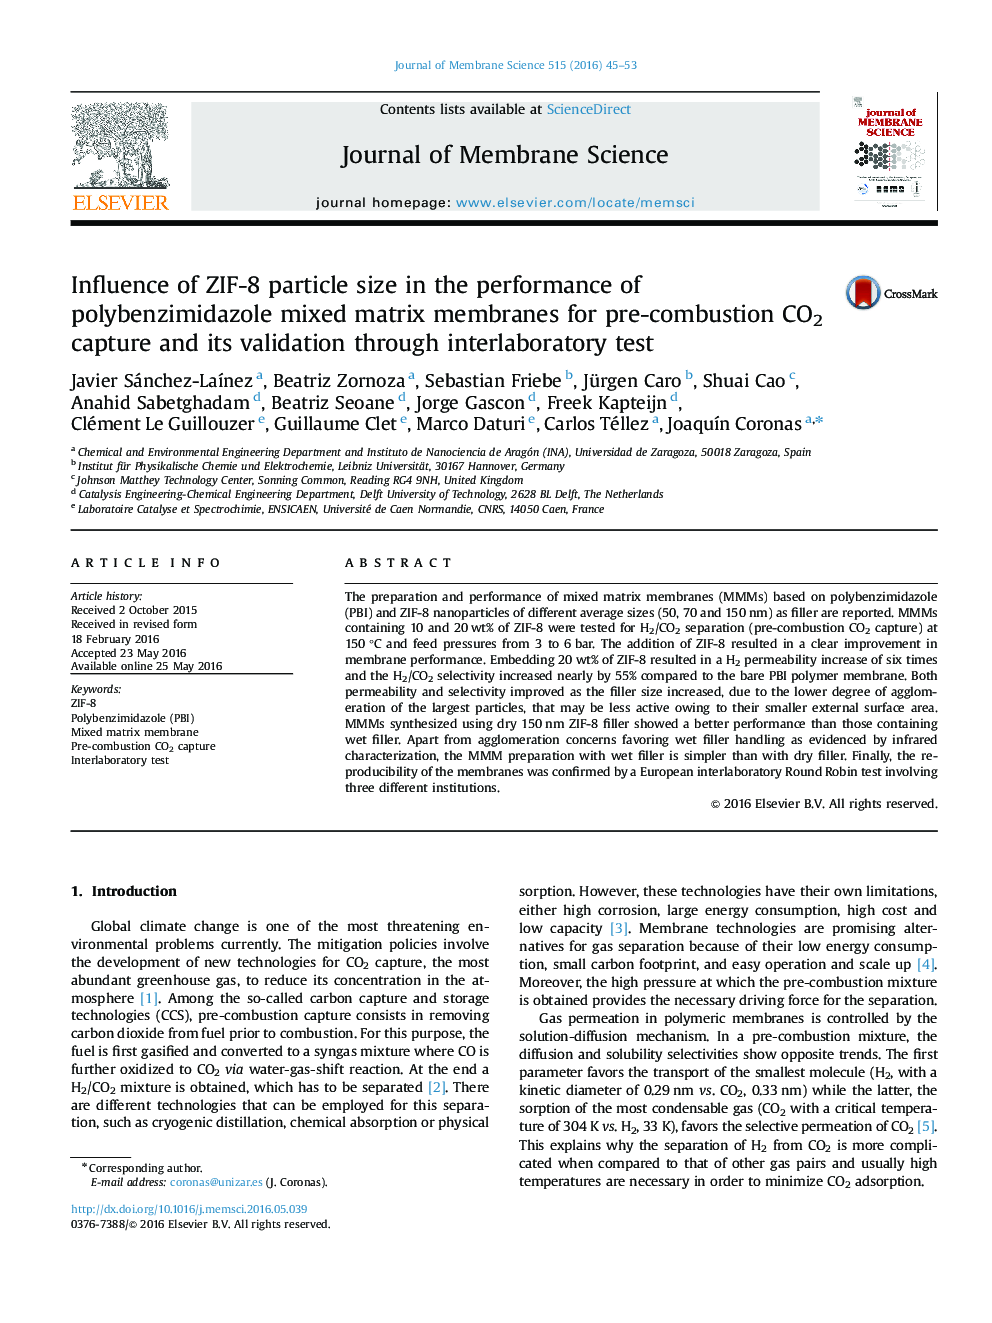 Influence of ZIF-8 particle size in the performance of polybenzimidazole mixed matrix membranes for pre-combustion CO2 capture and its validation through interlaboratory test